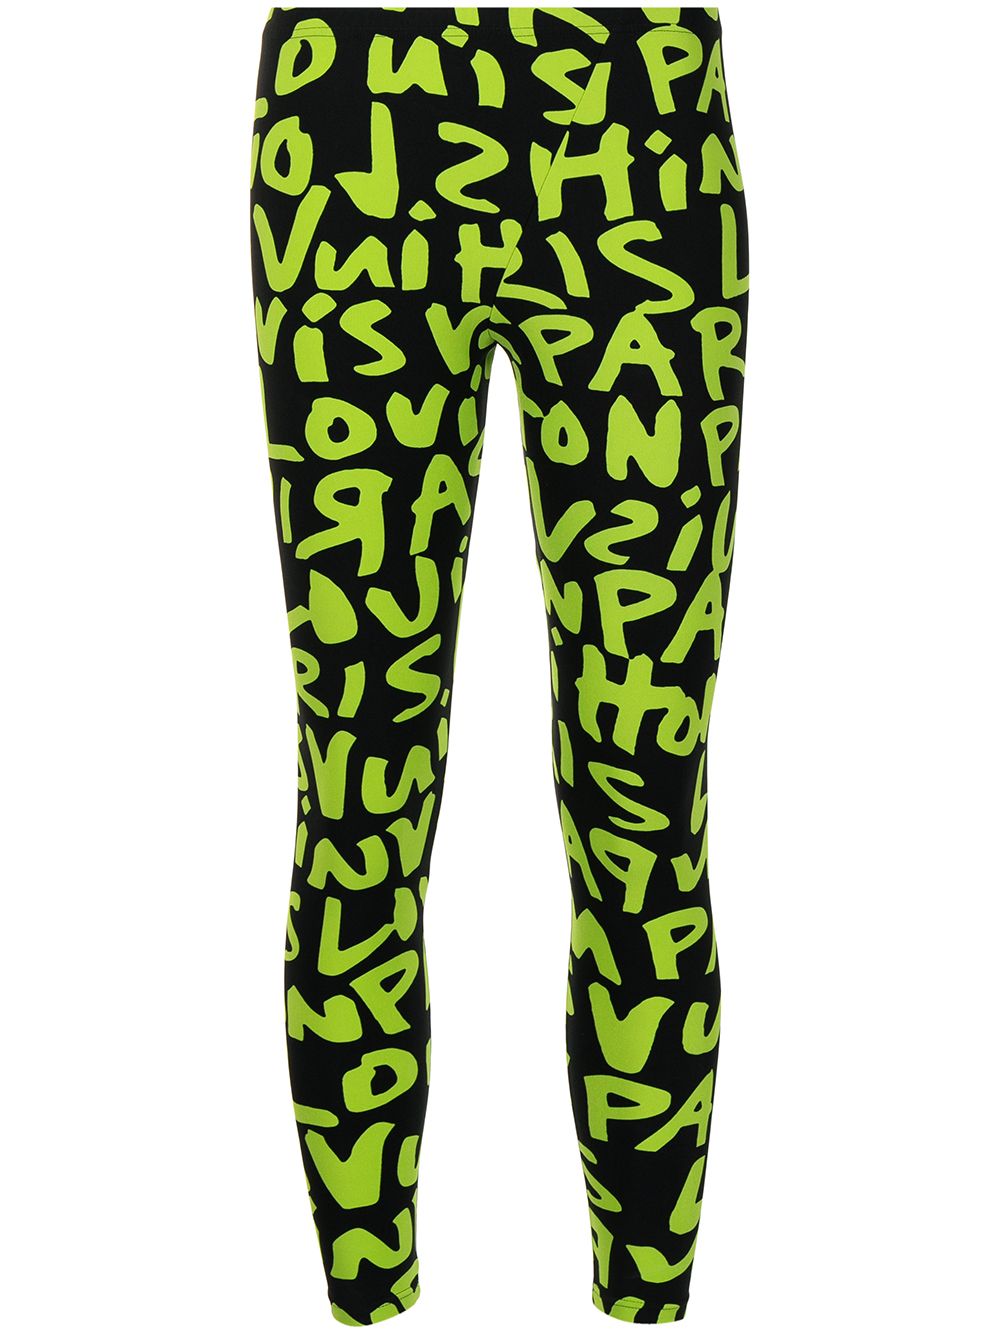 Louis Vuitton Pre-Owned x Stephen Sprouse 2001 Graffiti leggings - Black von Louis Vuitton Pre-Owned